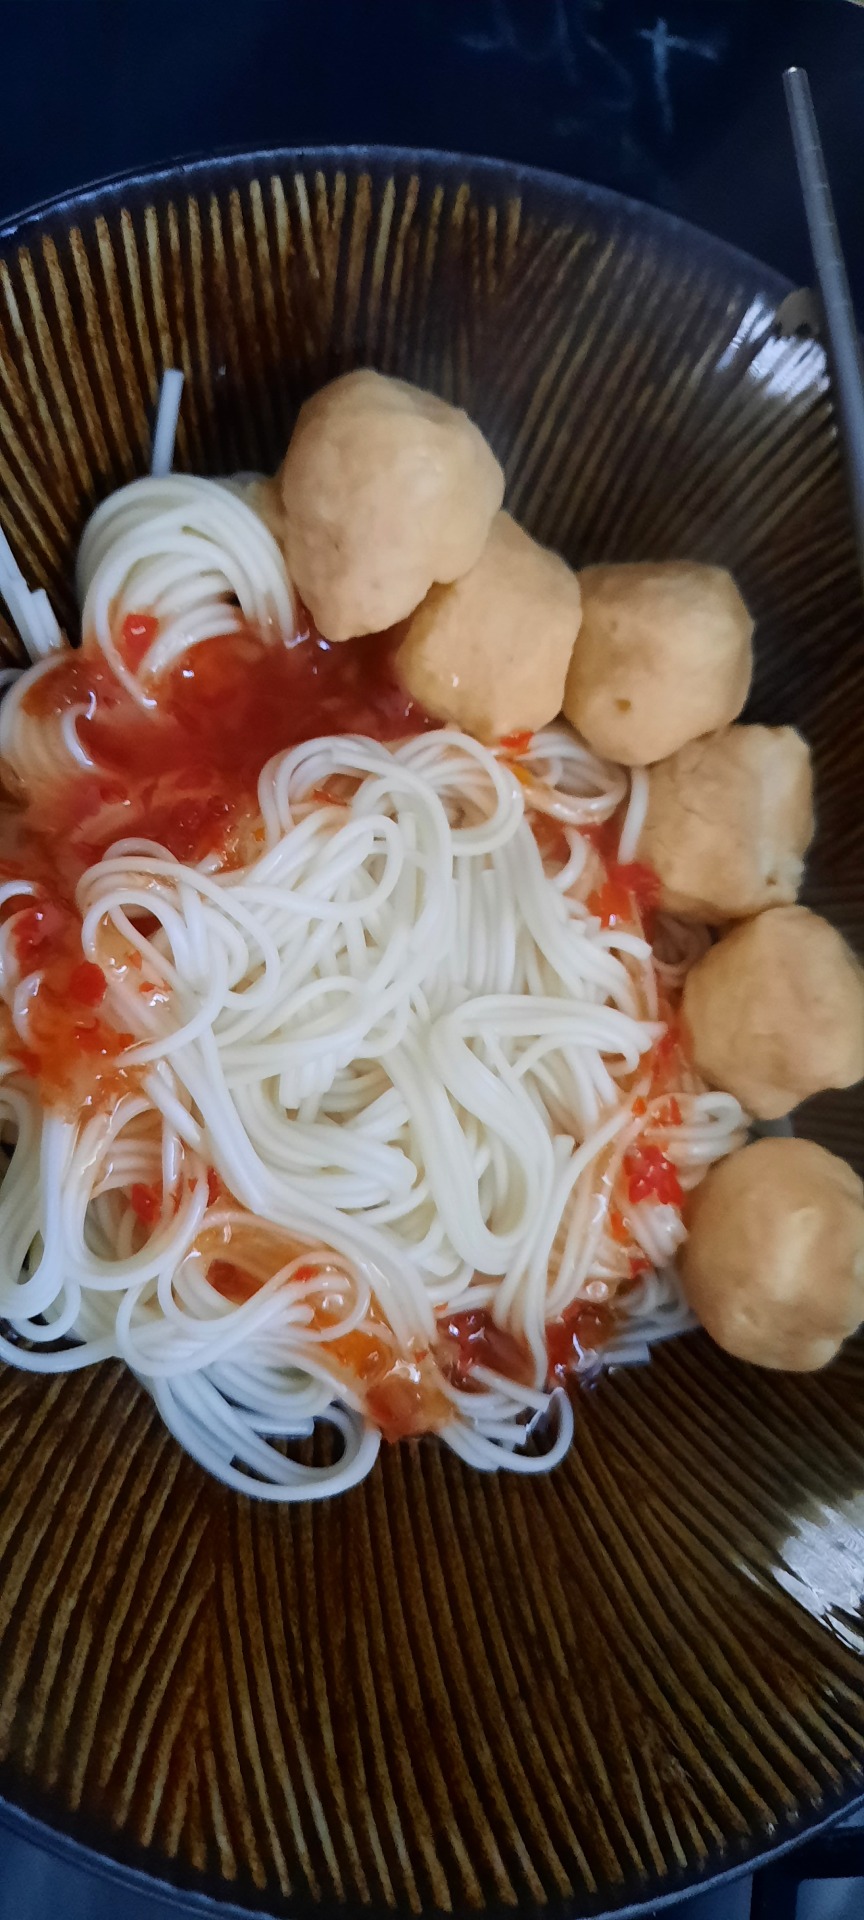 so I got some yudan #noodles#yu dan#fish balls#homemade #sweet and sour  #♥ tip me to add veggies to this so I can poop lol